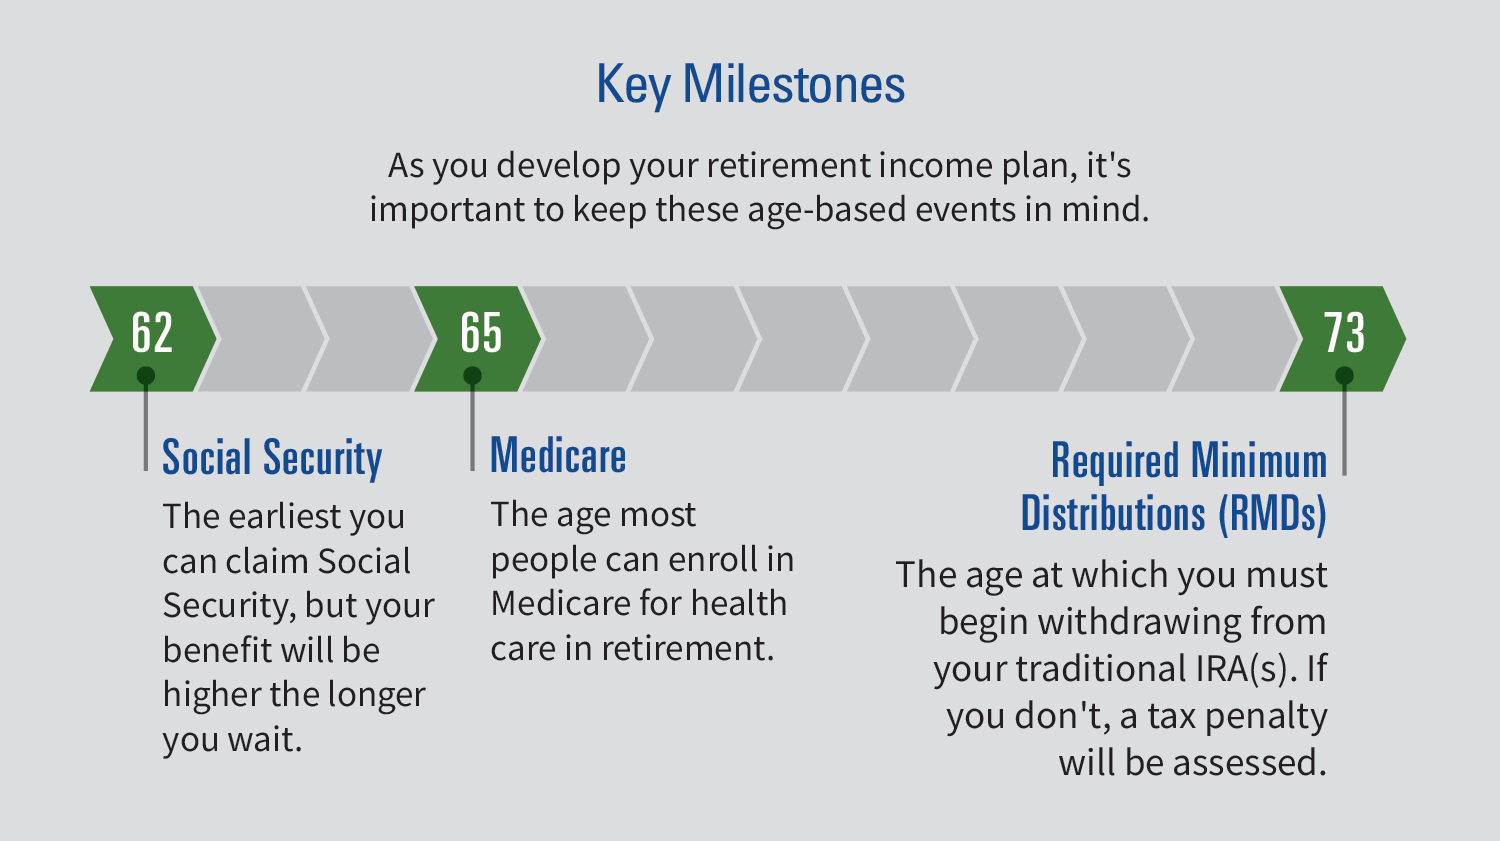 Flow chart showing age-based milestones to keep in mind on your retirement journey. Age 62 is the earliest you can claim social security income. Age 65 is the age most people can enroll in Medicare. Age 73 is the age most people must begin withdrawing from your traditional IRAs via Required Minimum Distributions.